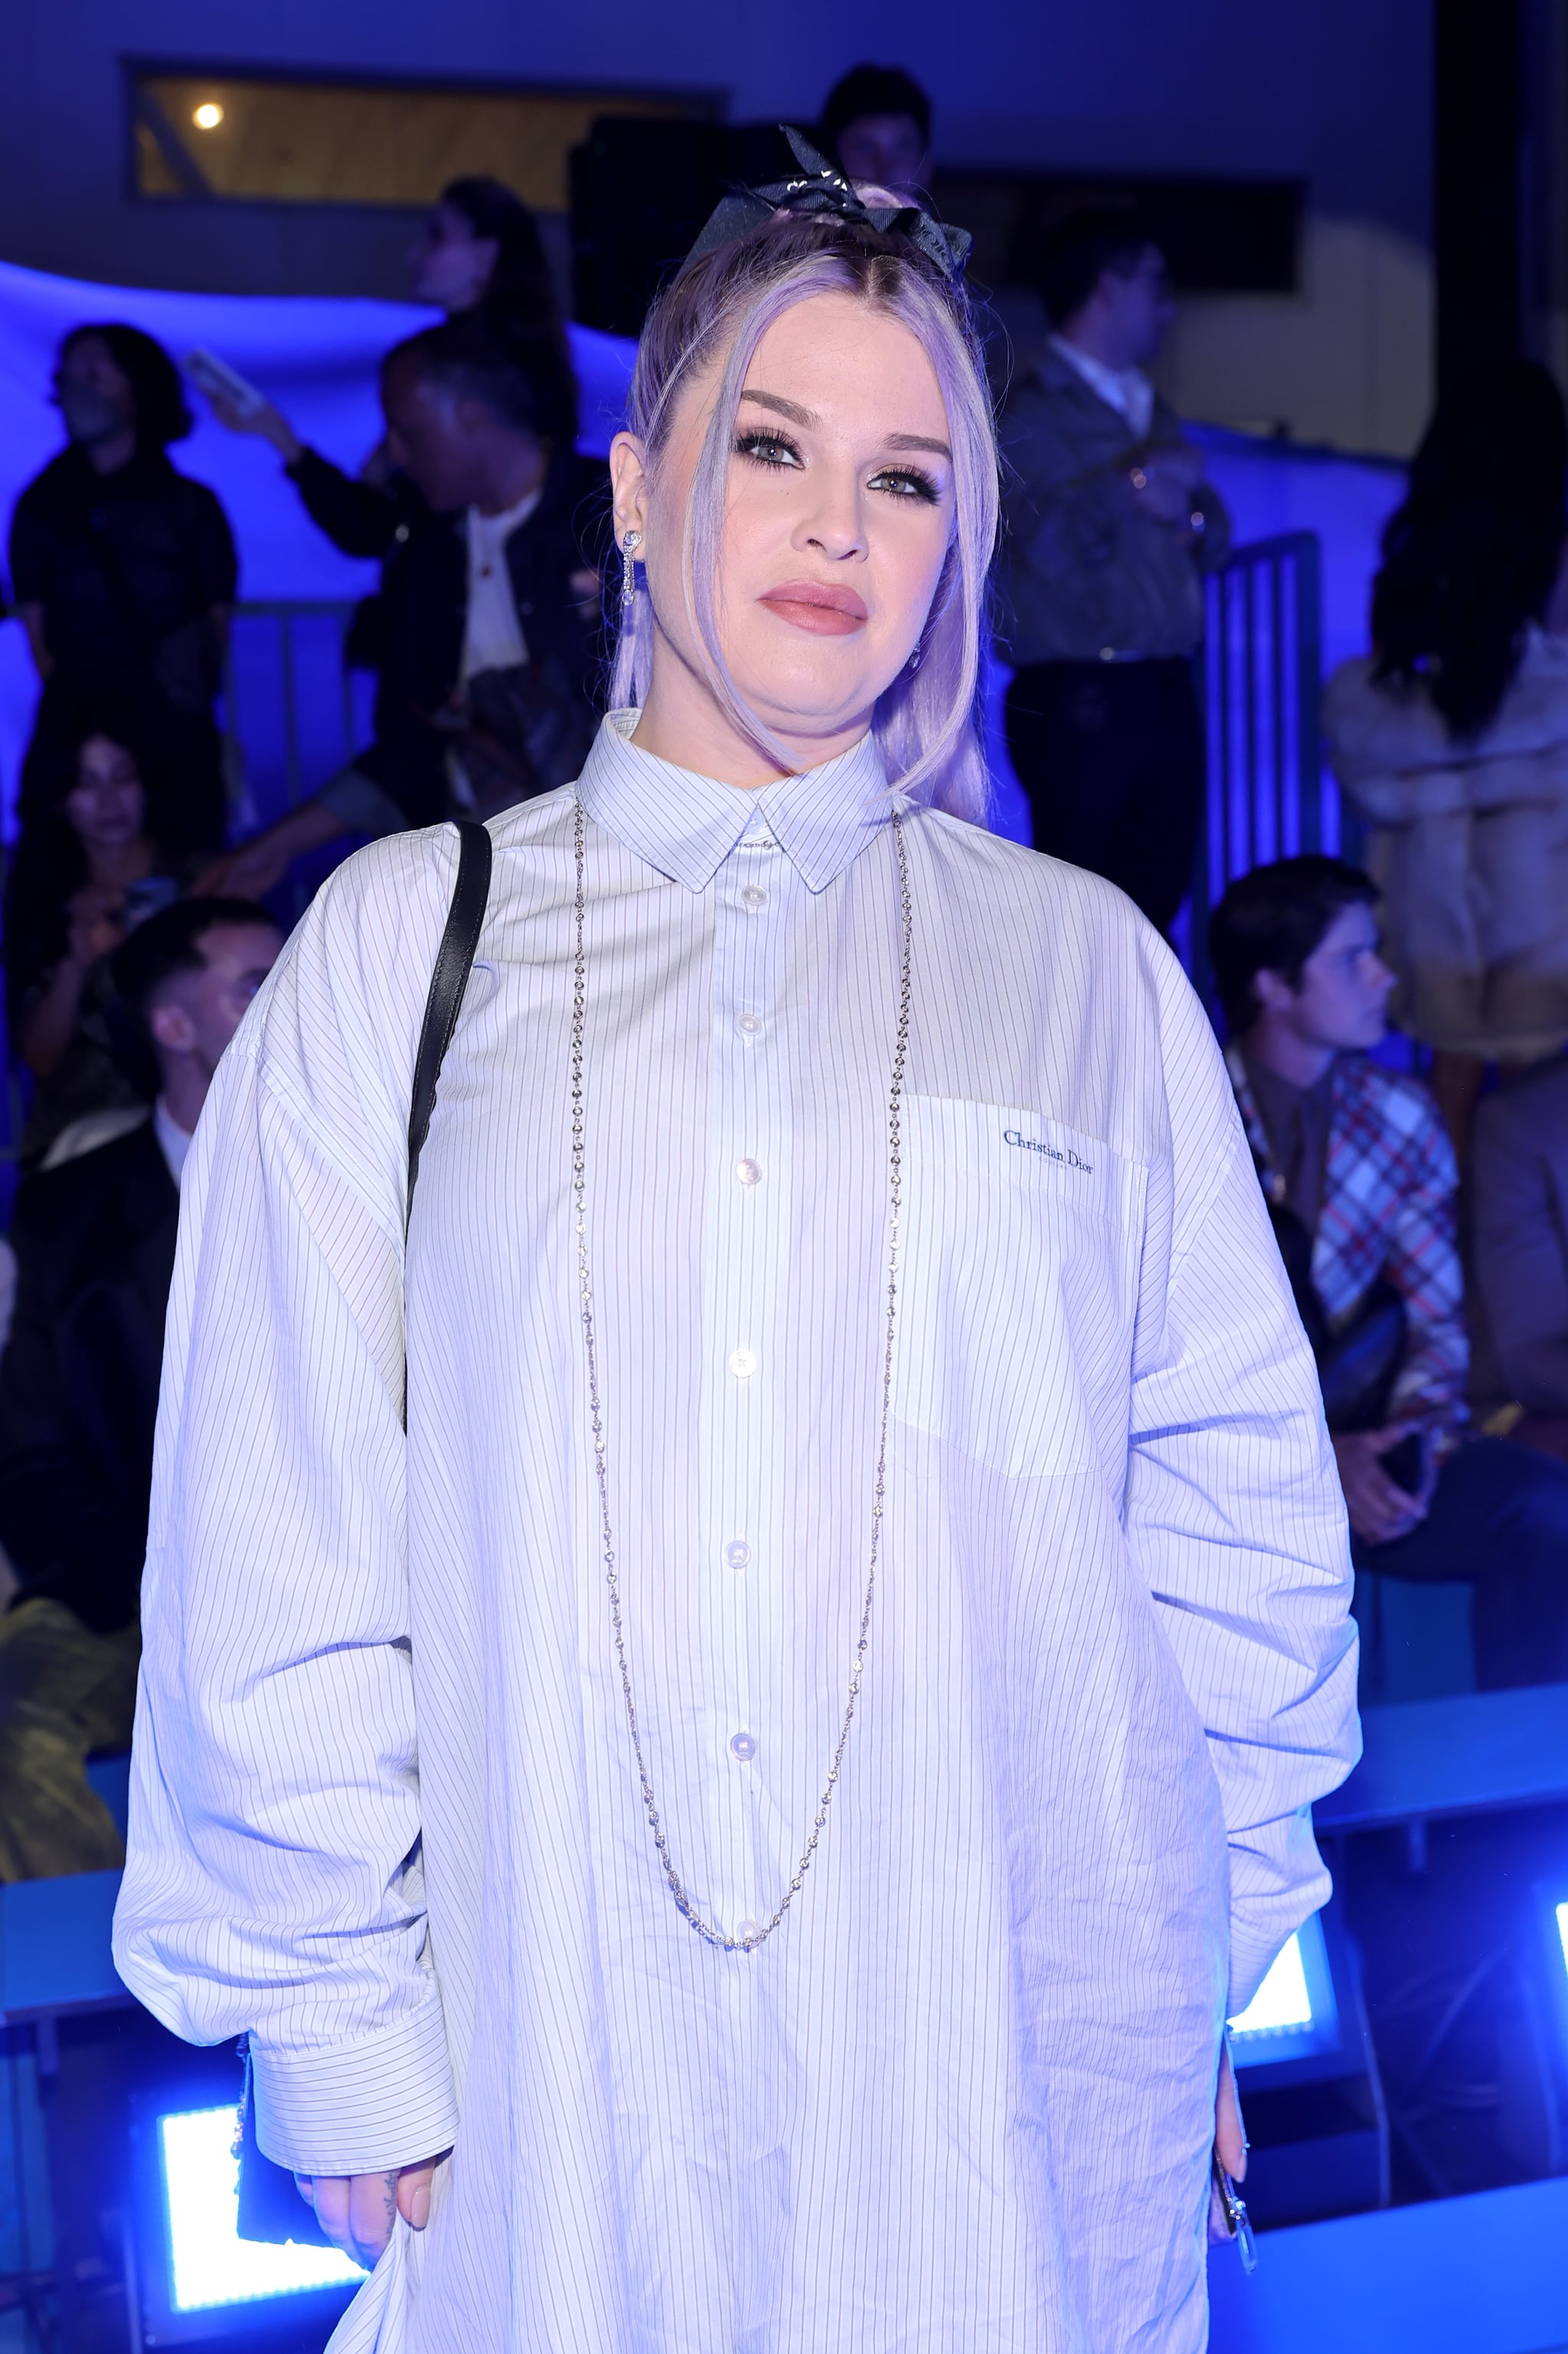 LOS ANGELES, CALIFORNIA - MAY 19: Kelly Osbourne attends the Dior Men's Spring/Summer 2023 Collection on May 19, 2022 in Los Angeles, California. (Photo by Amy Sussman/Getty Images,)